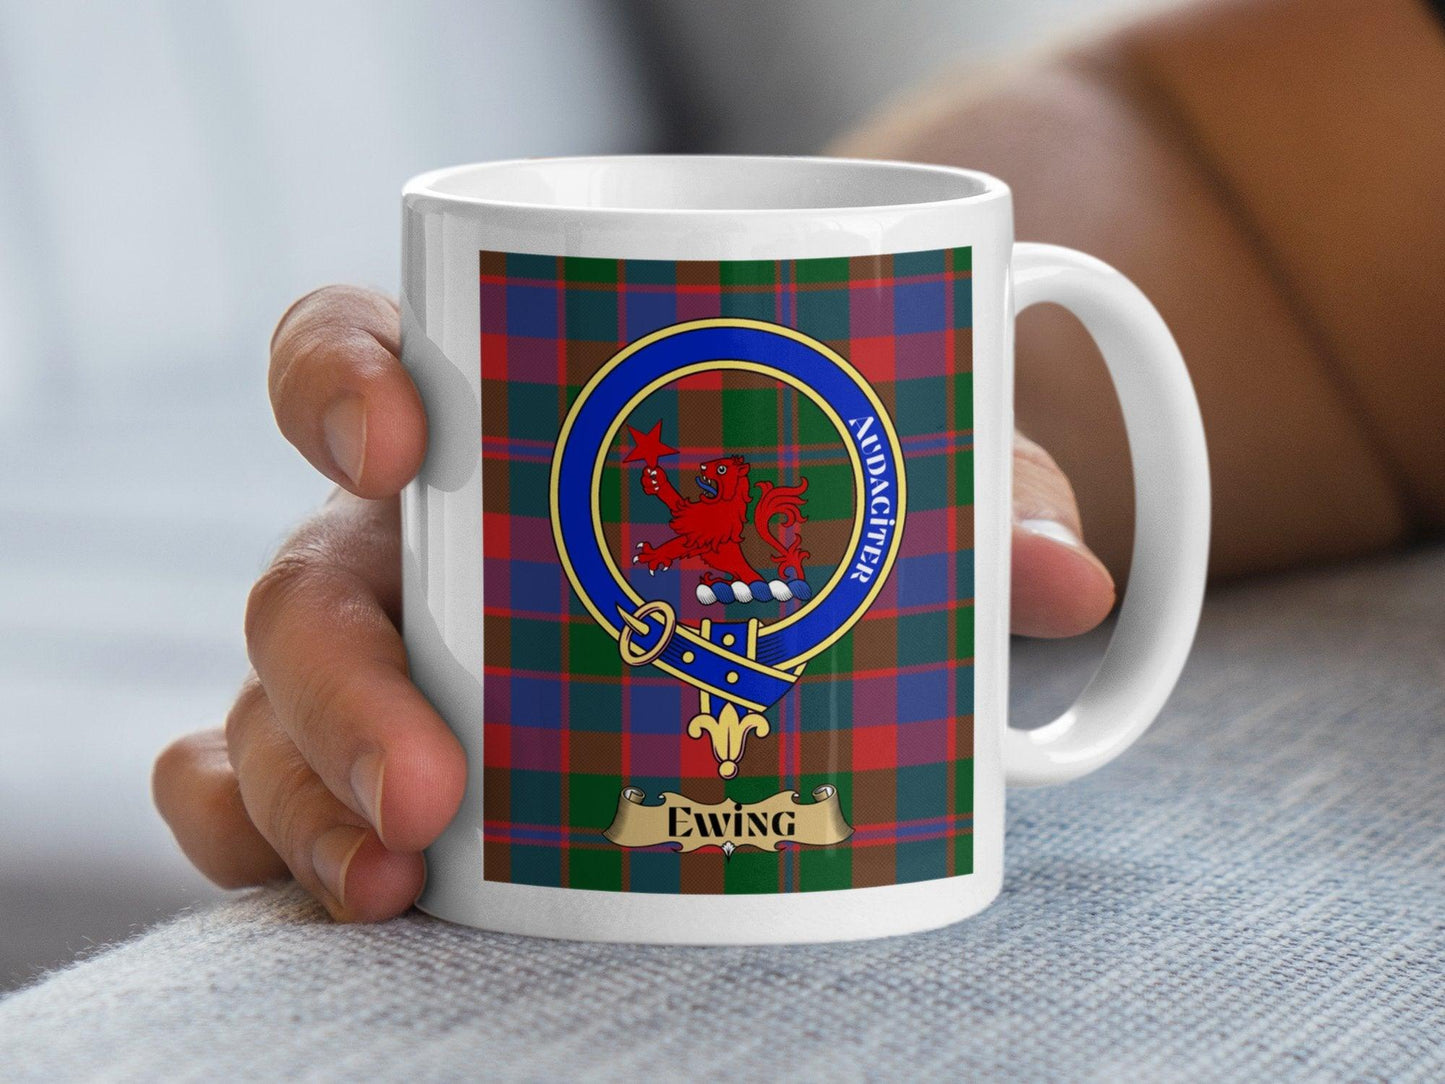 Scottish Clan Tartan Mug with Ewing Crest and Motto - Living Stone Gifts